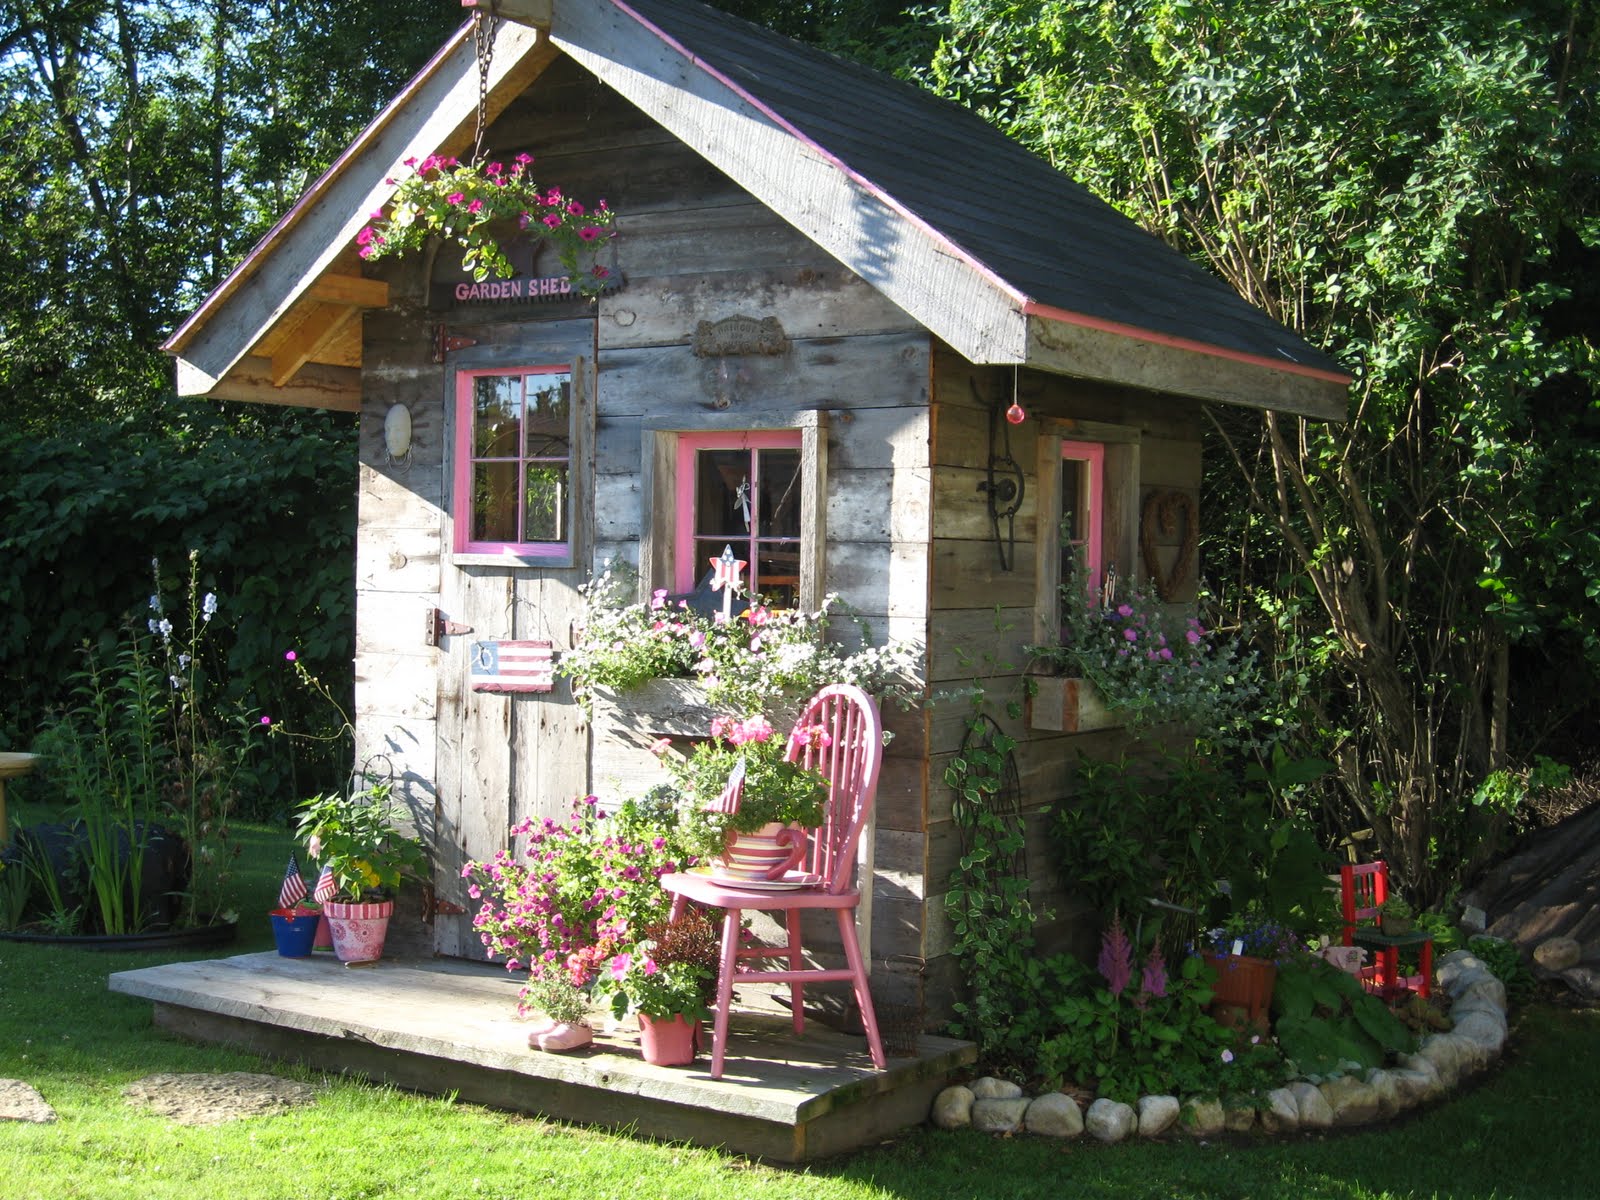 Cute little garden shed with shabby chic exterior